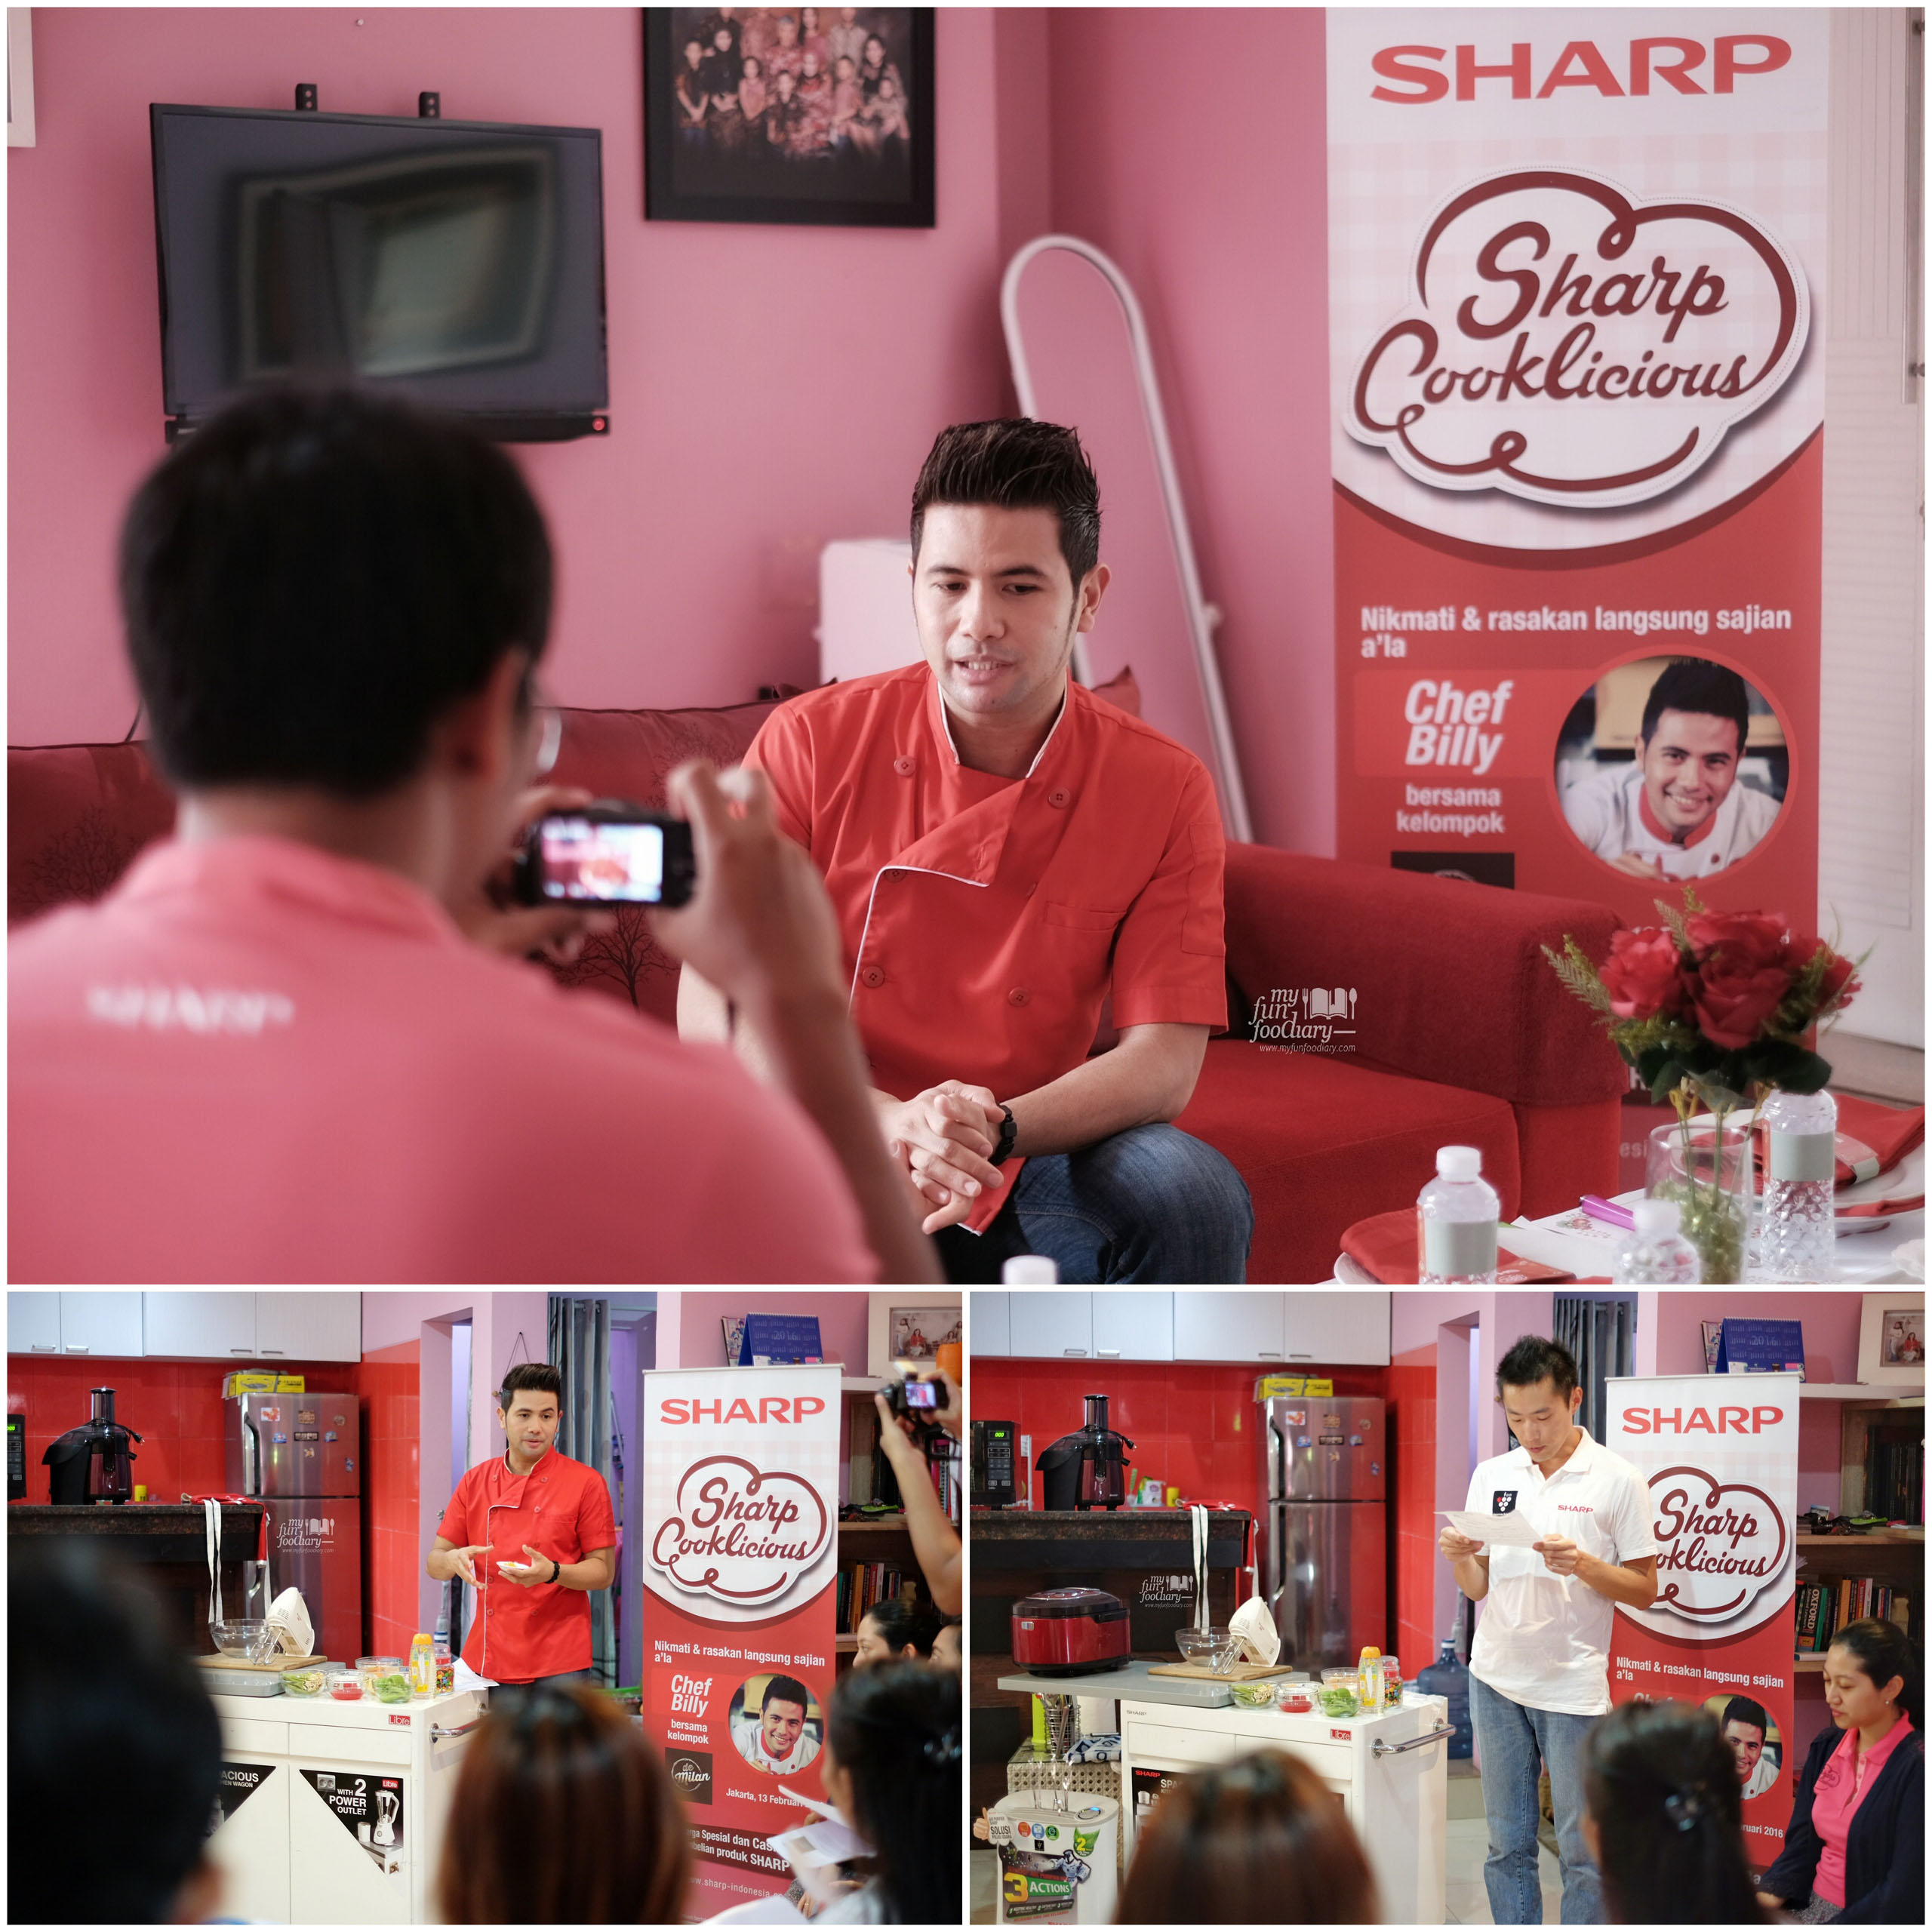 Chef Billy for Sharp Cooklicious by Myfunfoodiary